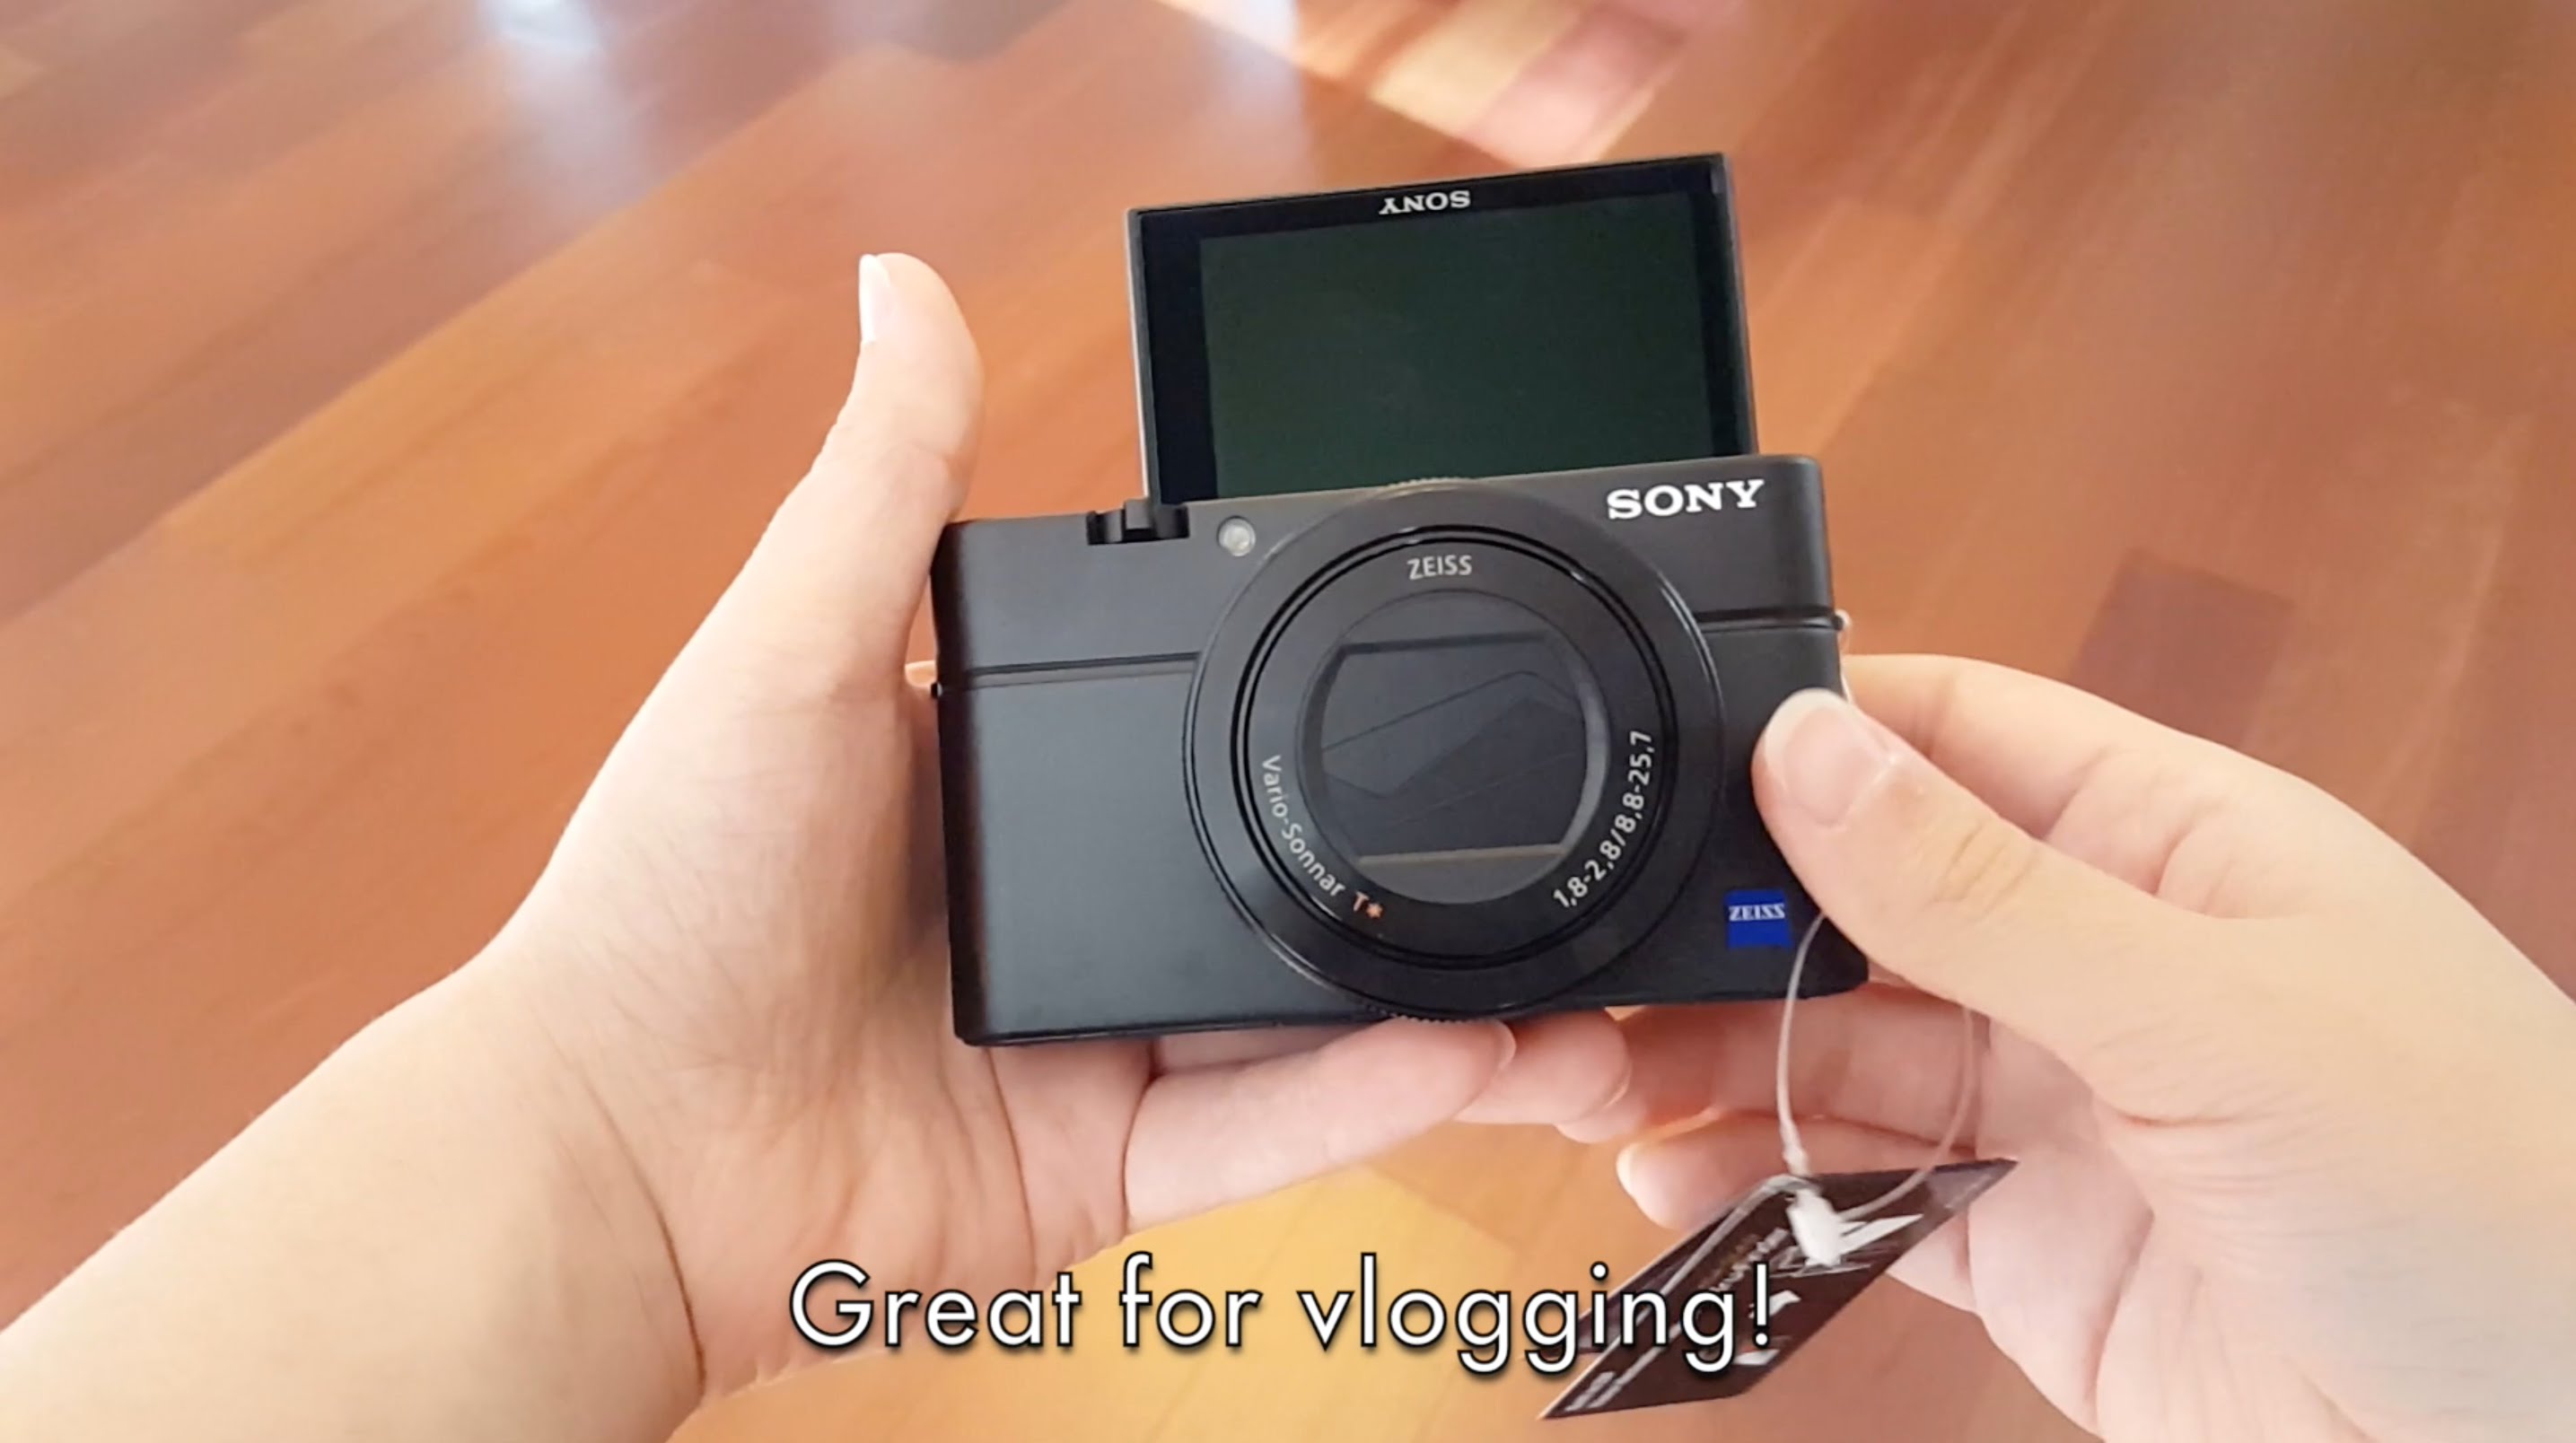 Sony RX100 IV: The Challenge Begins (A good main camera?)